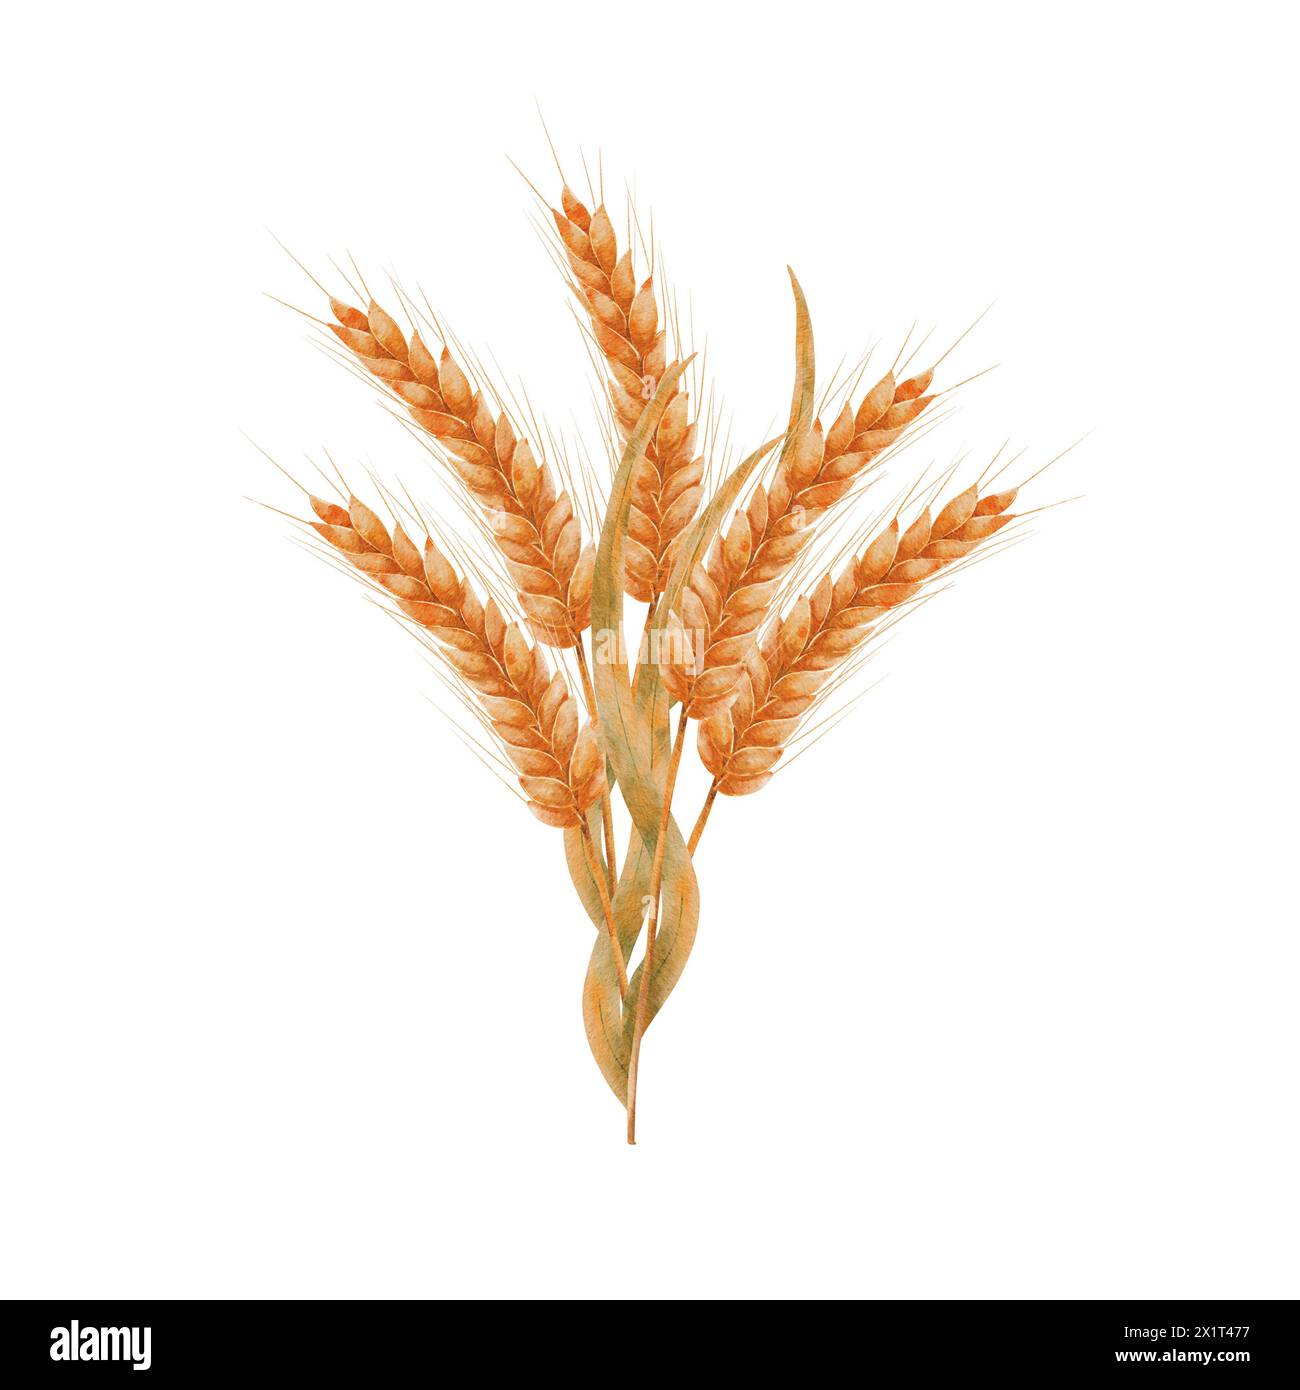 Ears of ripe wheat. A bouquet, a composition of ears of grain. Wheat isolated on white background. Design for sticker, label, postcard. Stock Photo